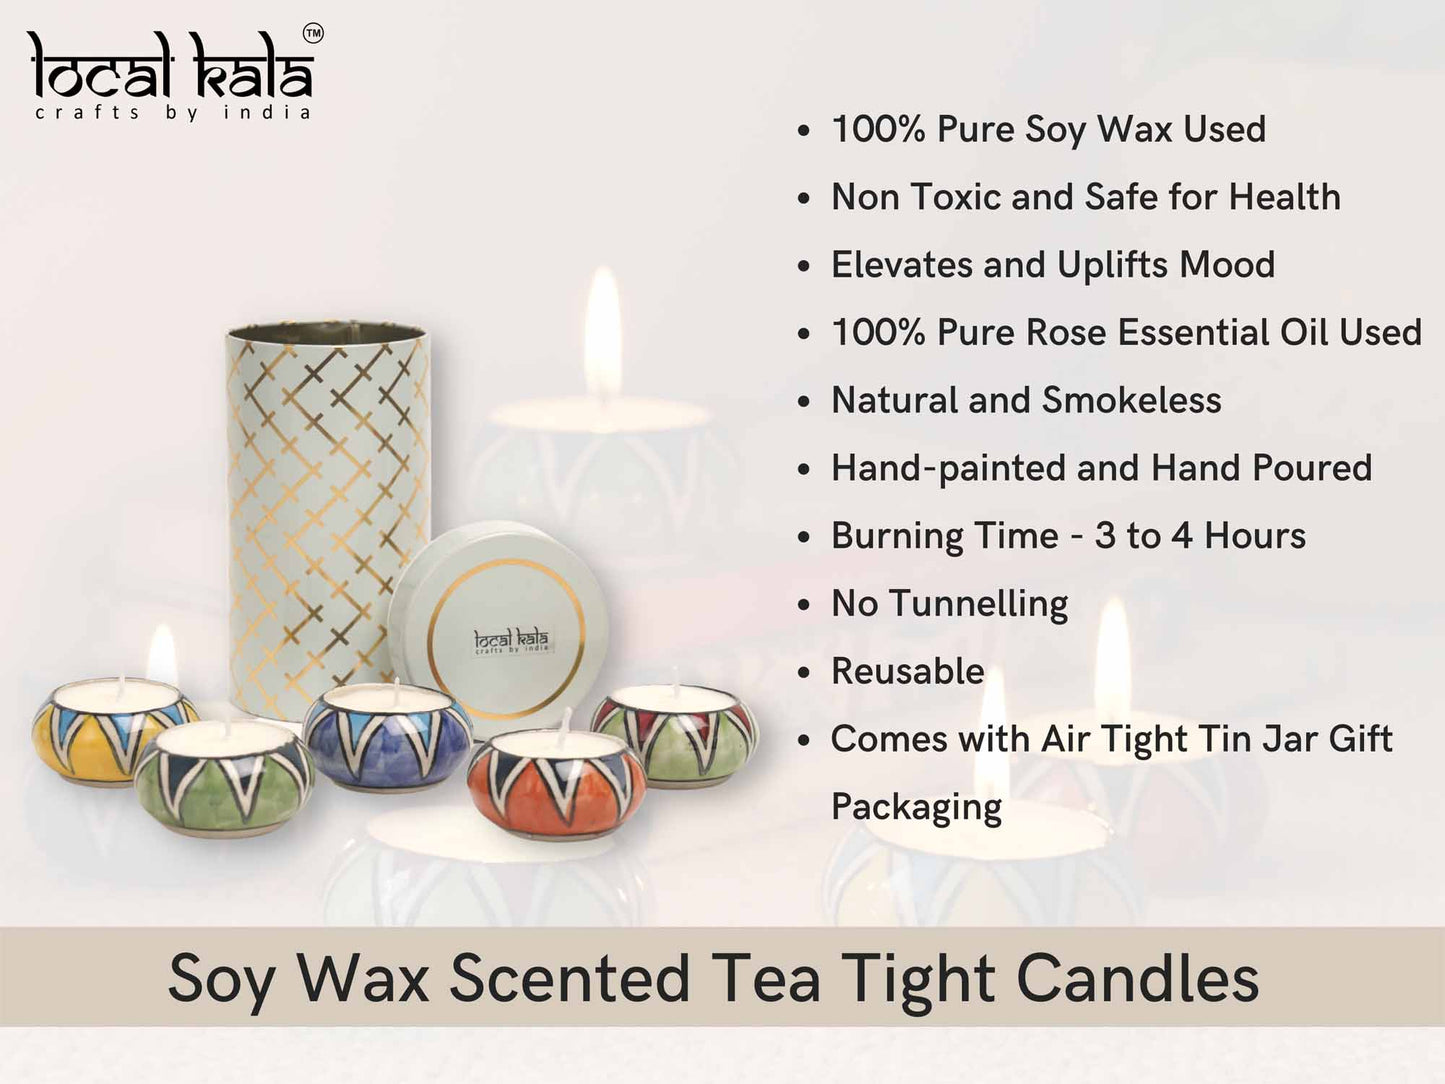 Scented Tea Lights Gift Hamper - Set of 5 with an Air tight jar